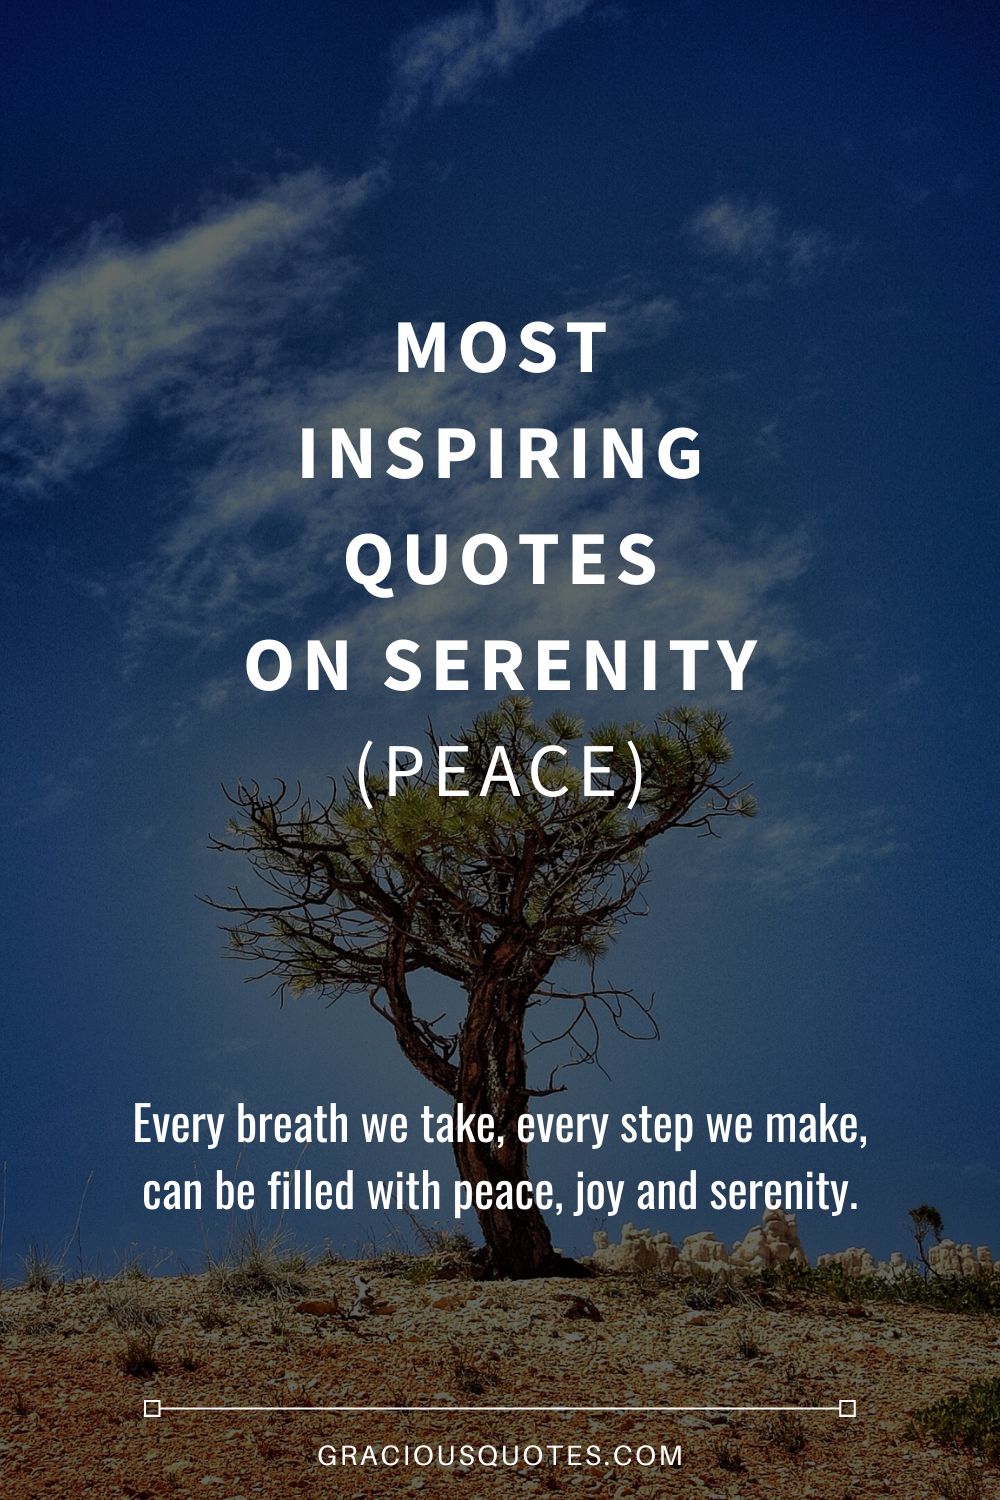 Most Inspiring Quotes on Serenity (PEACE) - Gracious Quotes